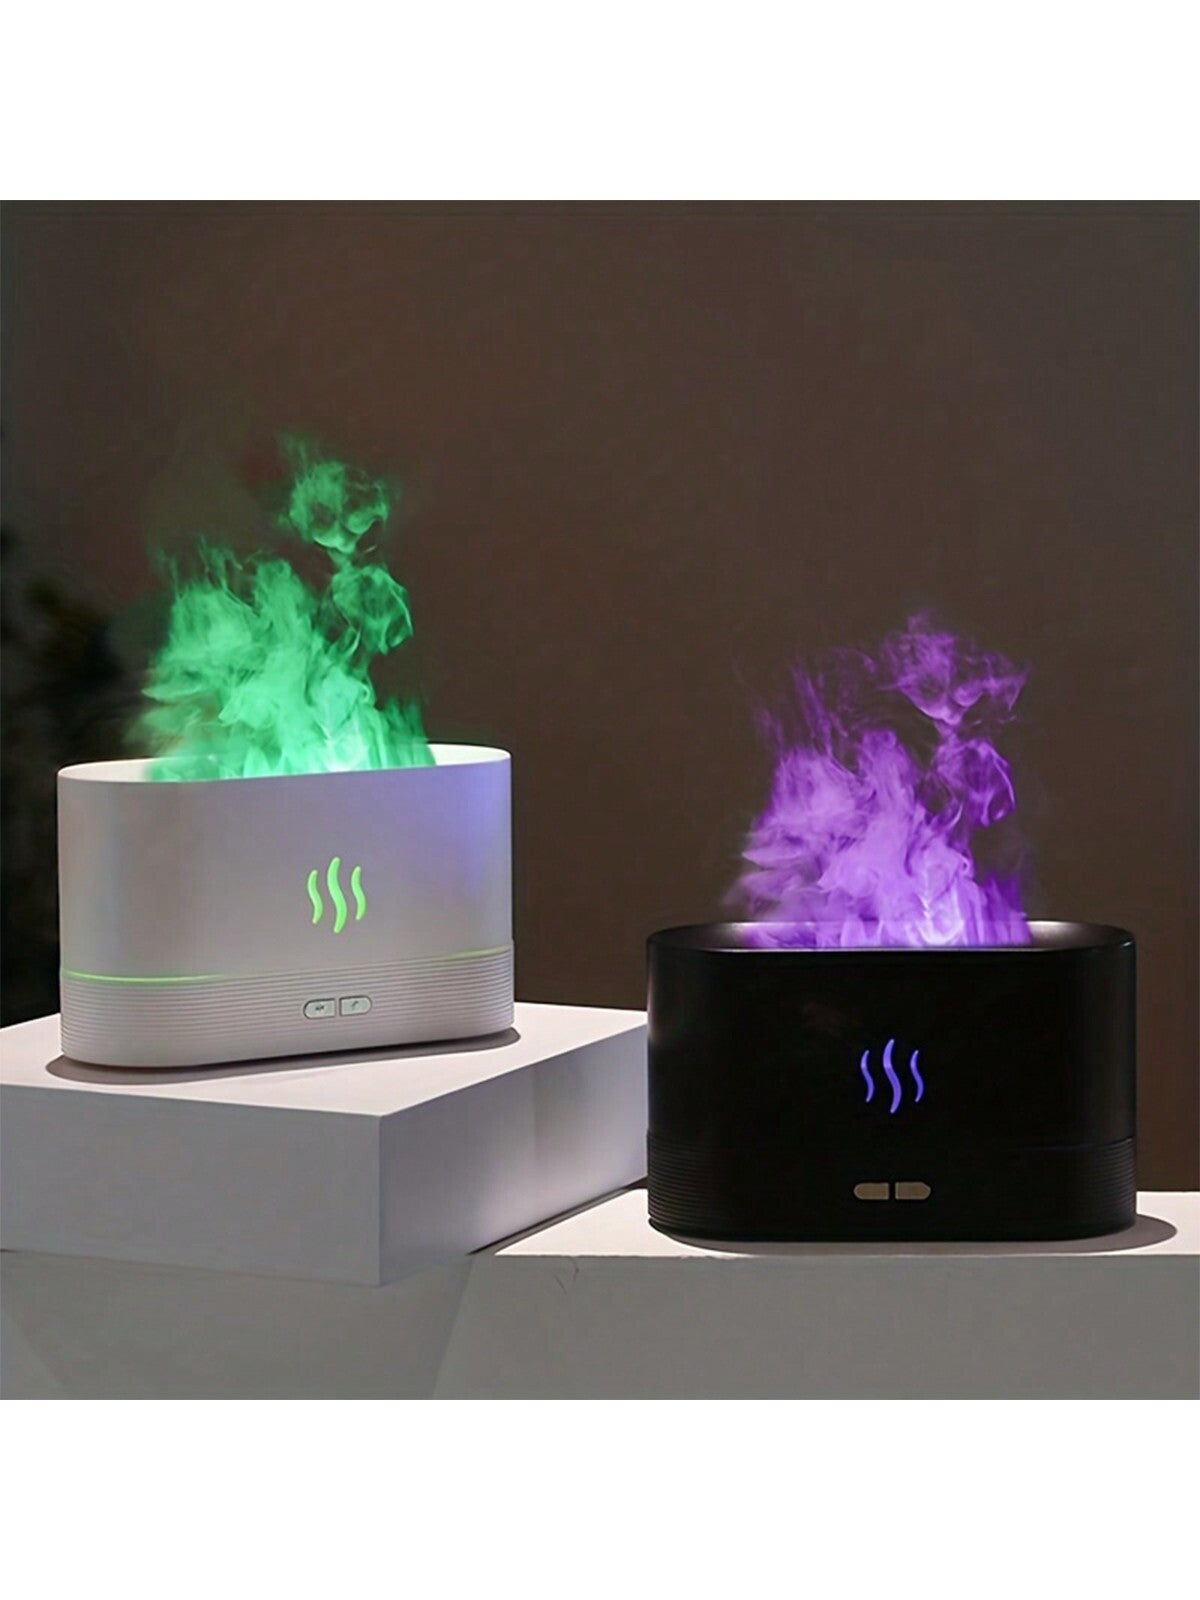 1pc Usb Plug-in 180ml Portable Led Seven Color Flame Simulation Humidifier Dq701a, Aromatherapy Essential Oil Diffuser, Perfect For Home & Office Use-White-1